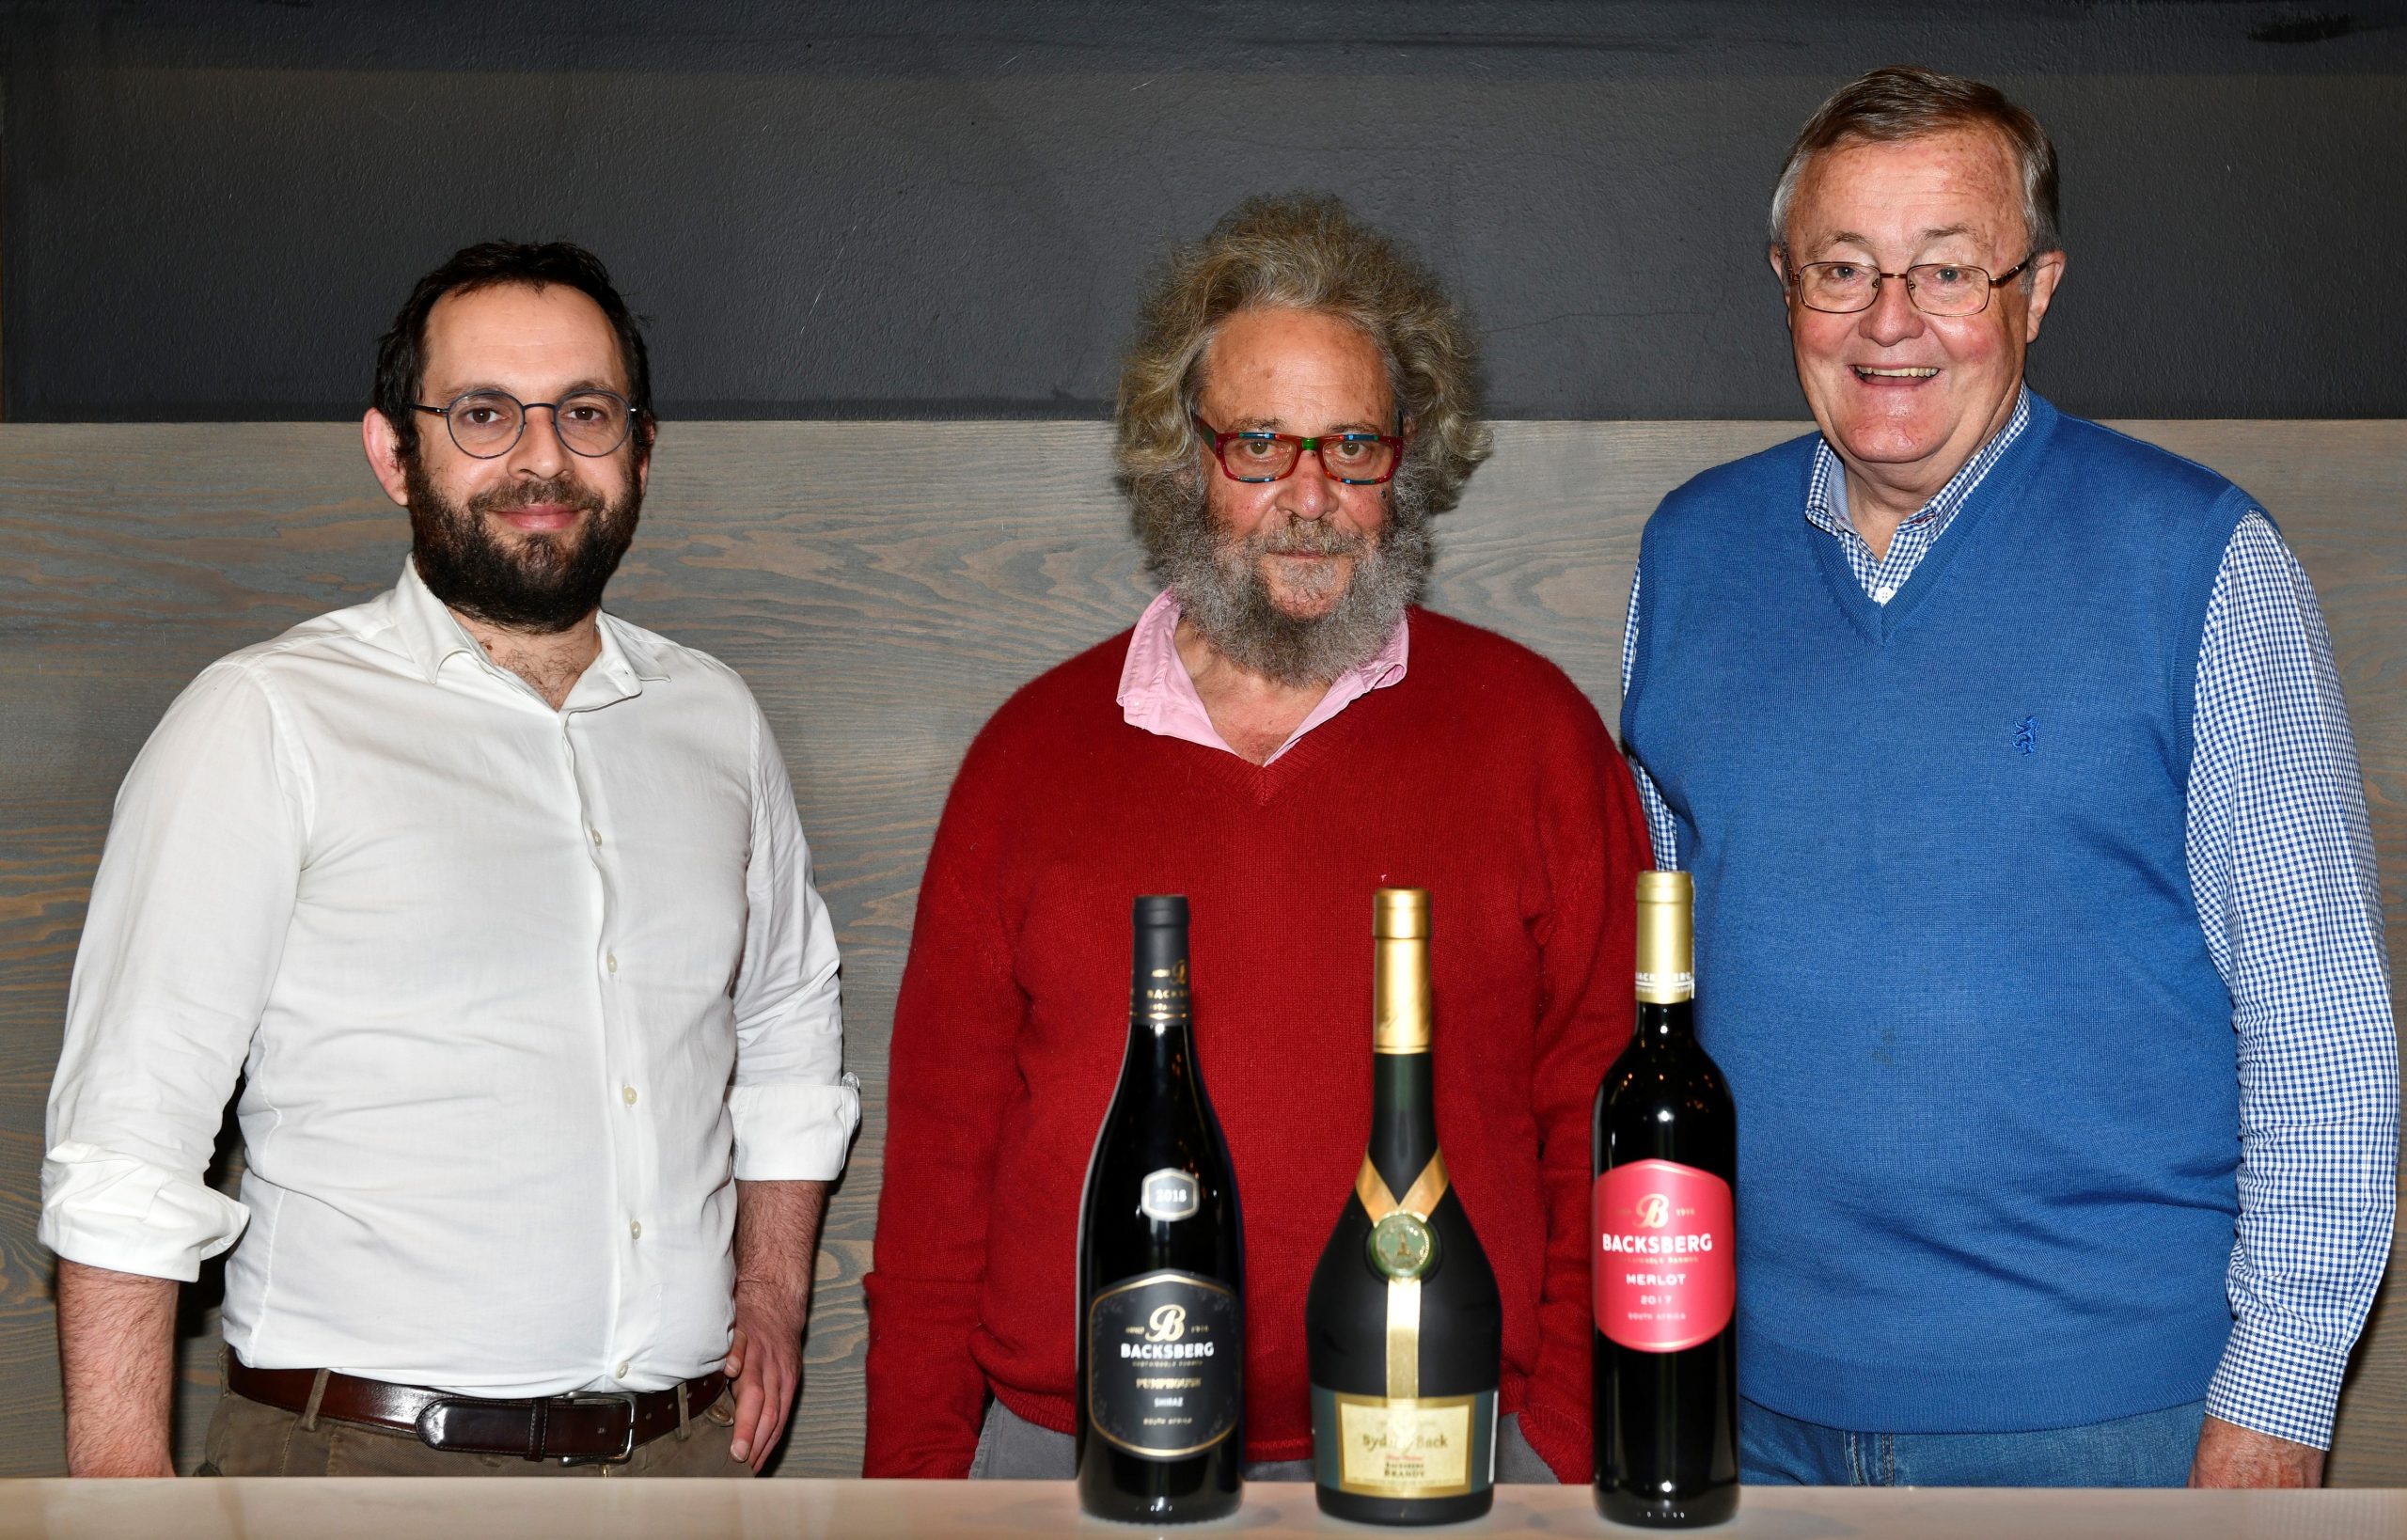 Simon and Michael Back with Tim Hutchinson, executive Chairman of DGB: DGB acquires a majority shareholding in Backsberg Family Wines